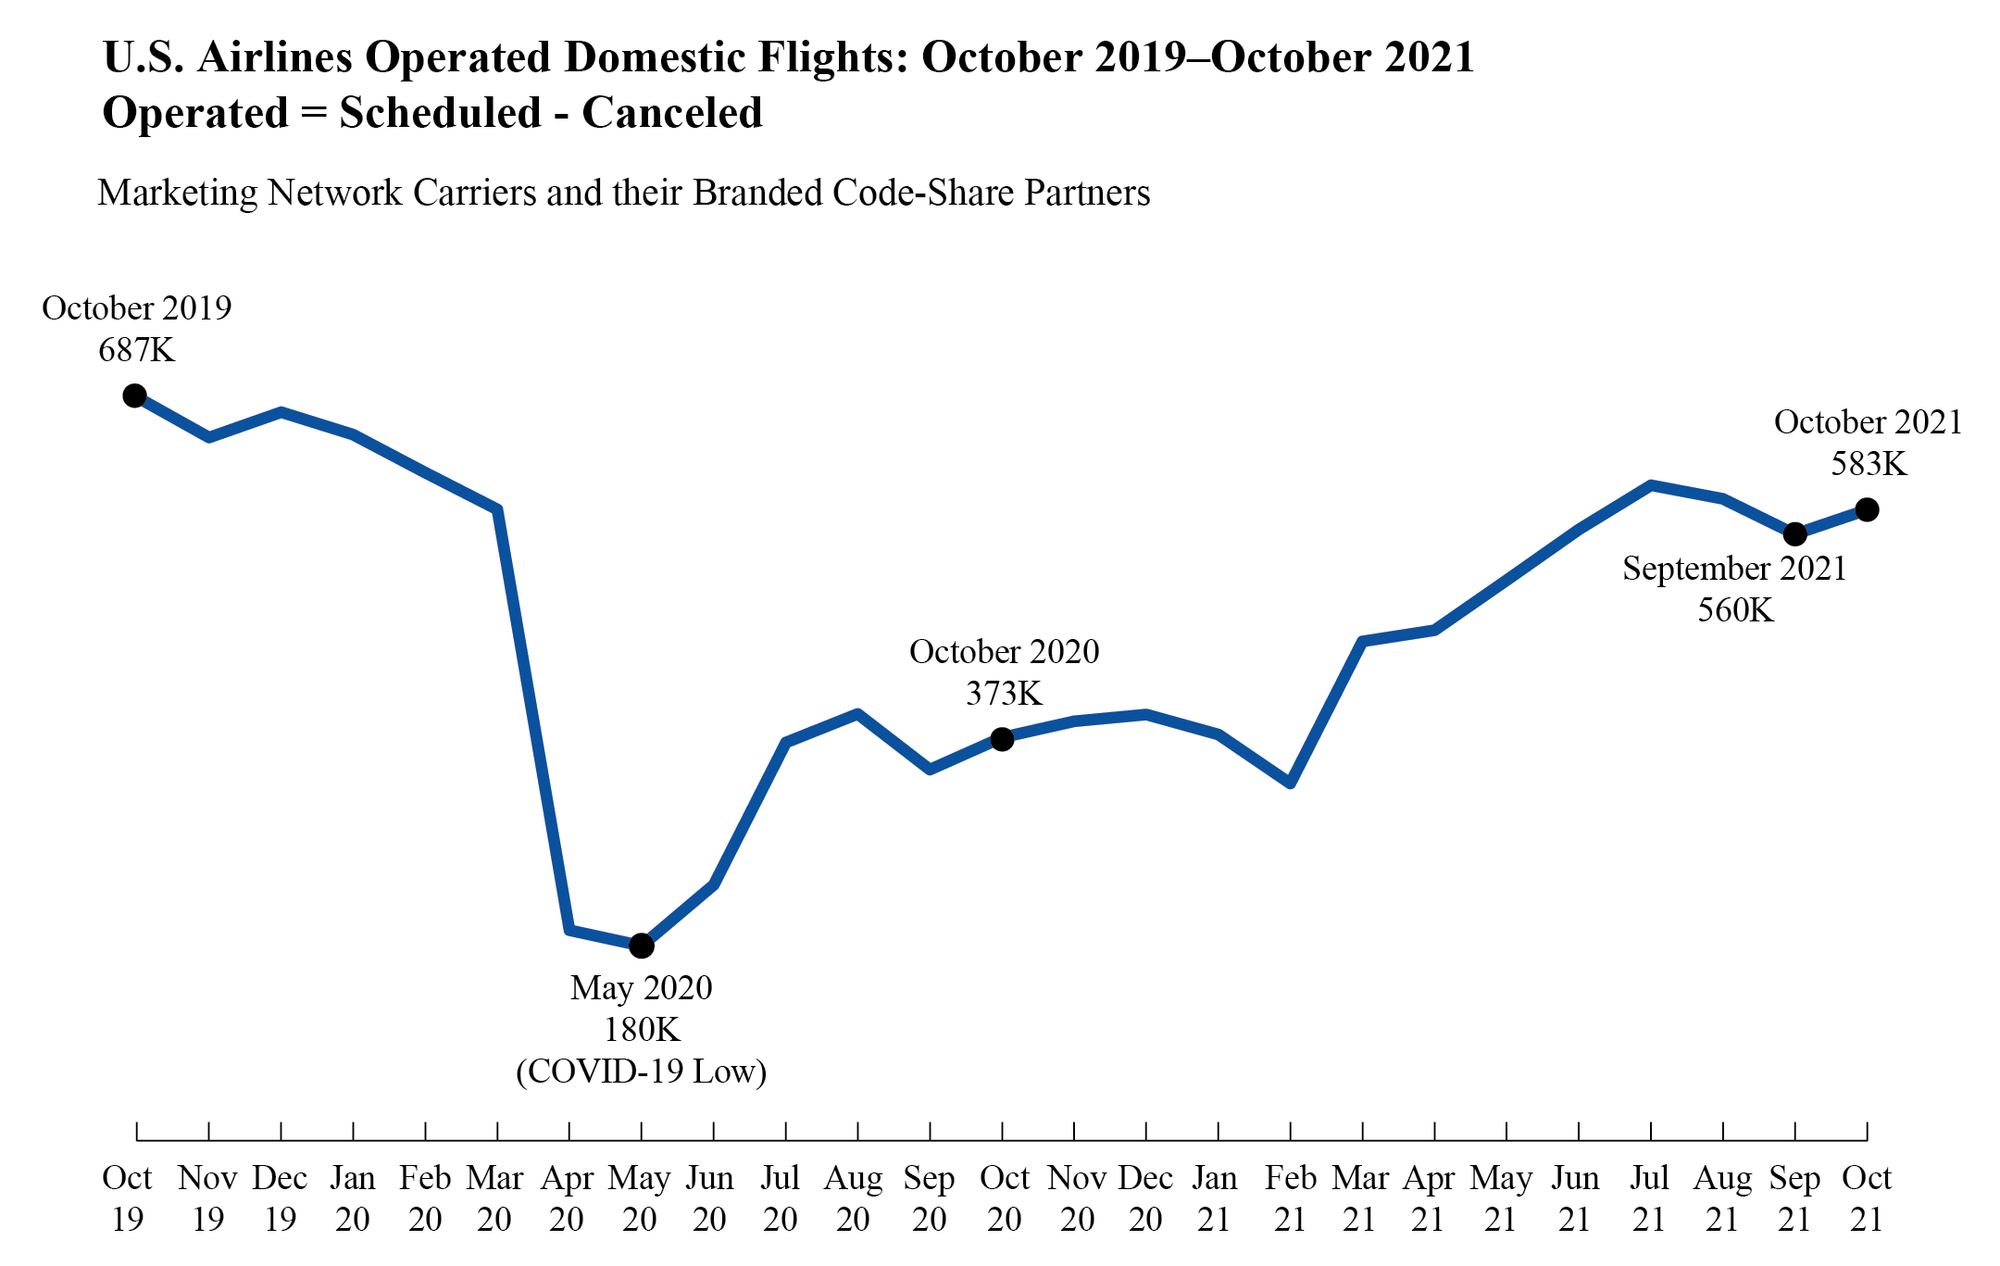 October 2021 U.S. Airlines Operated Flights